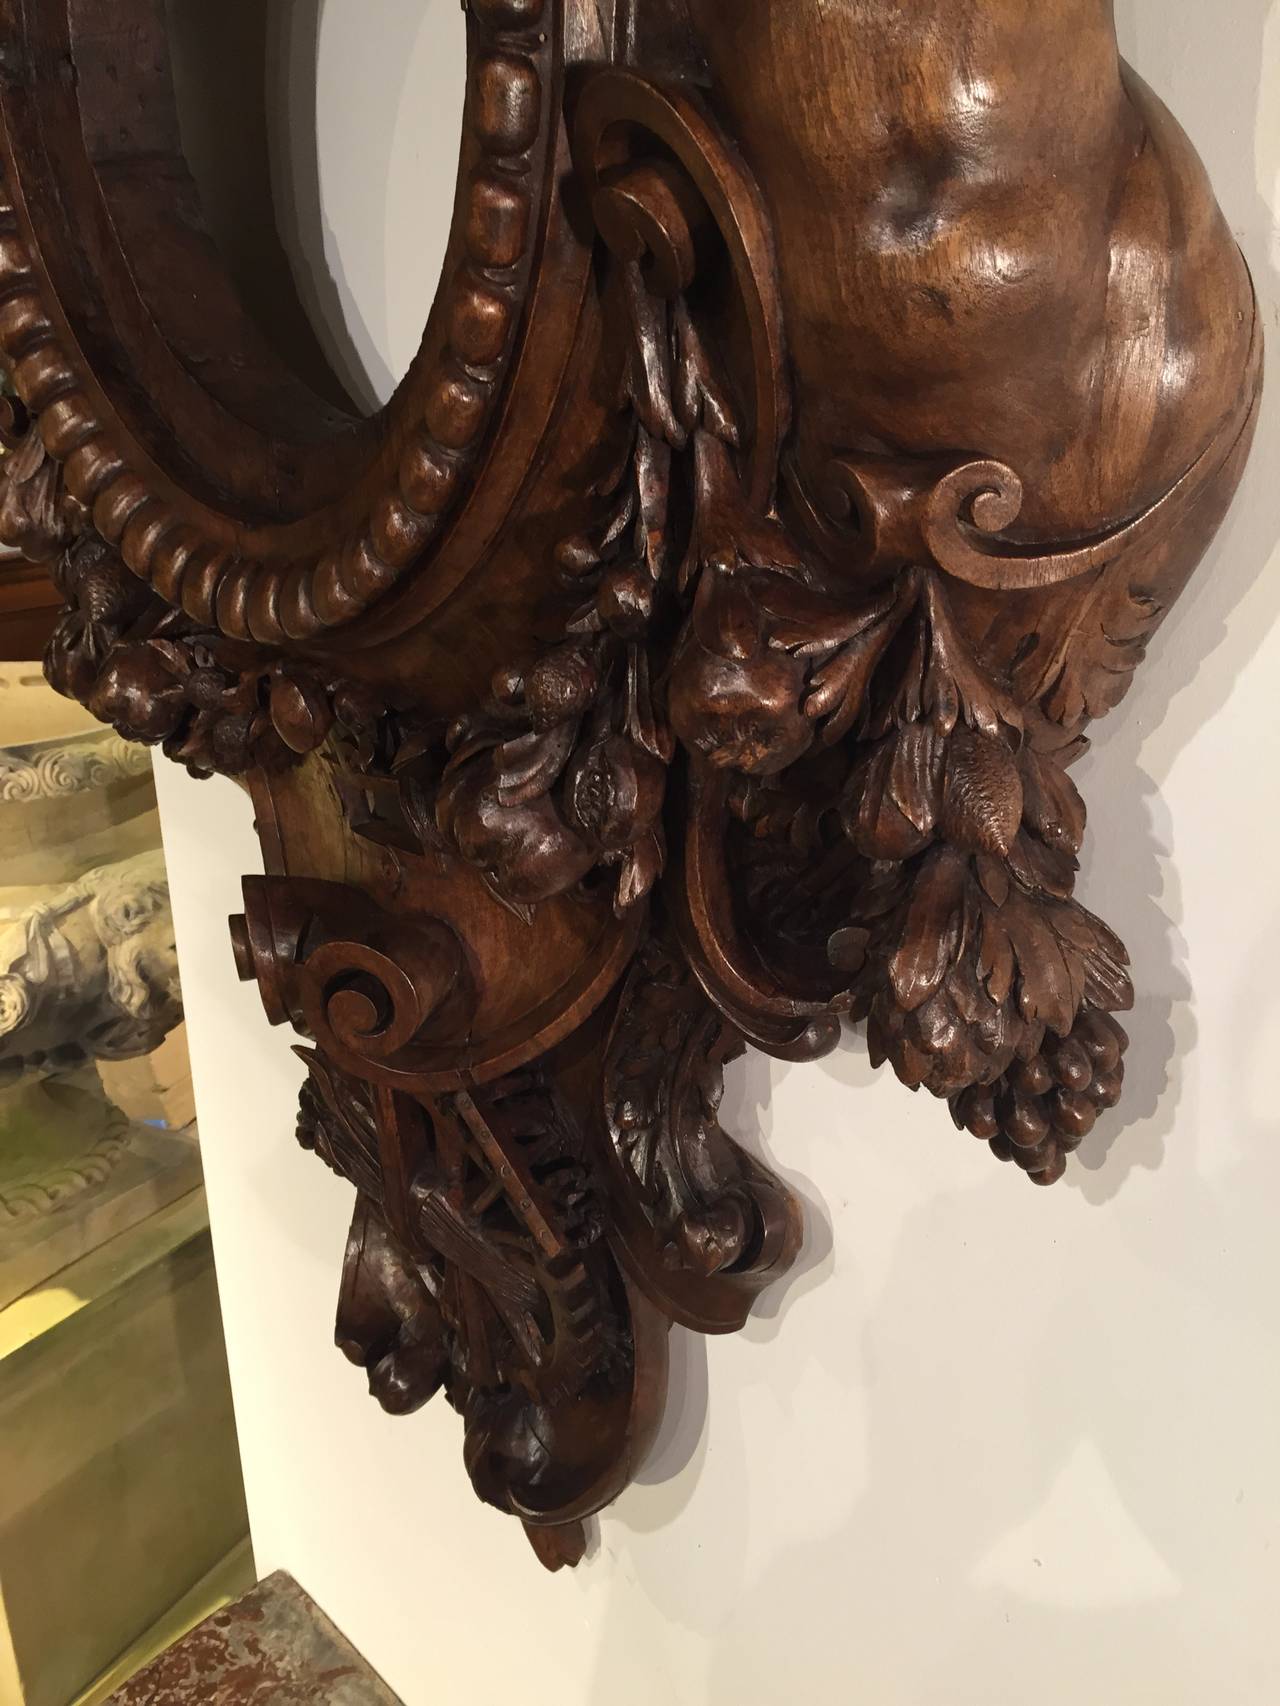 This antique French train station clock surround has been hand-carved from beautiful European Oak. It is in the form of a stylized cartouche. At the very top is a carved bust of the Roman God, Mercury, the swift messenger of the Gods and also the